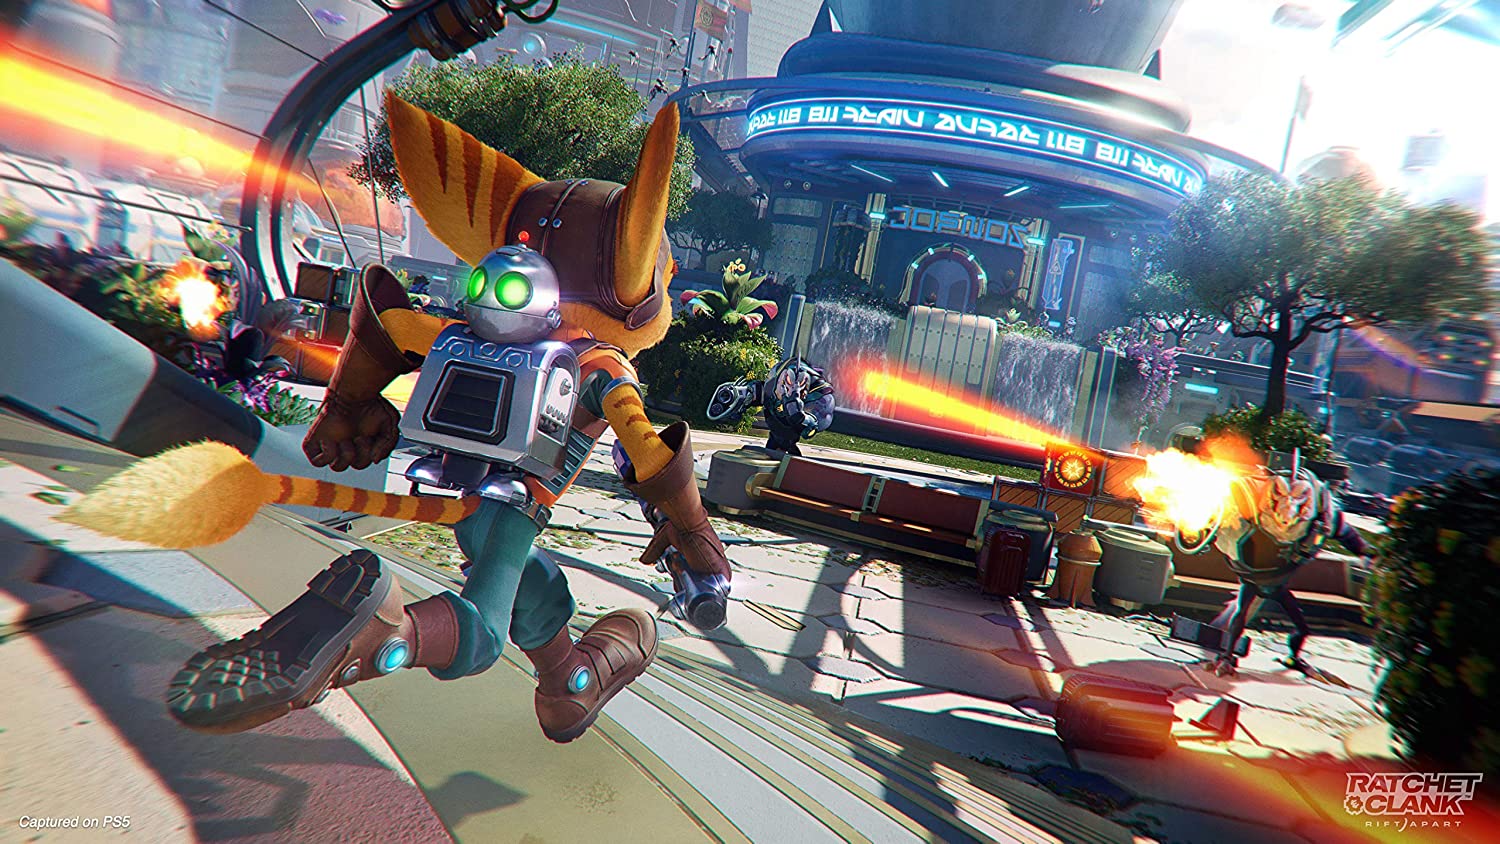 Aussie Affords: Over 20% Off Ratchet & Clank, Loss of life Mild 2 and Sniper Contracts 2!